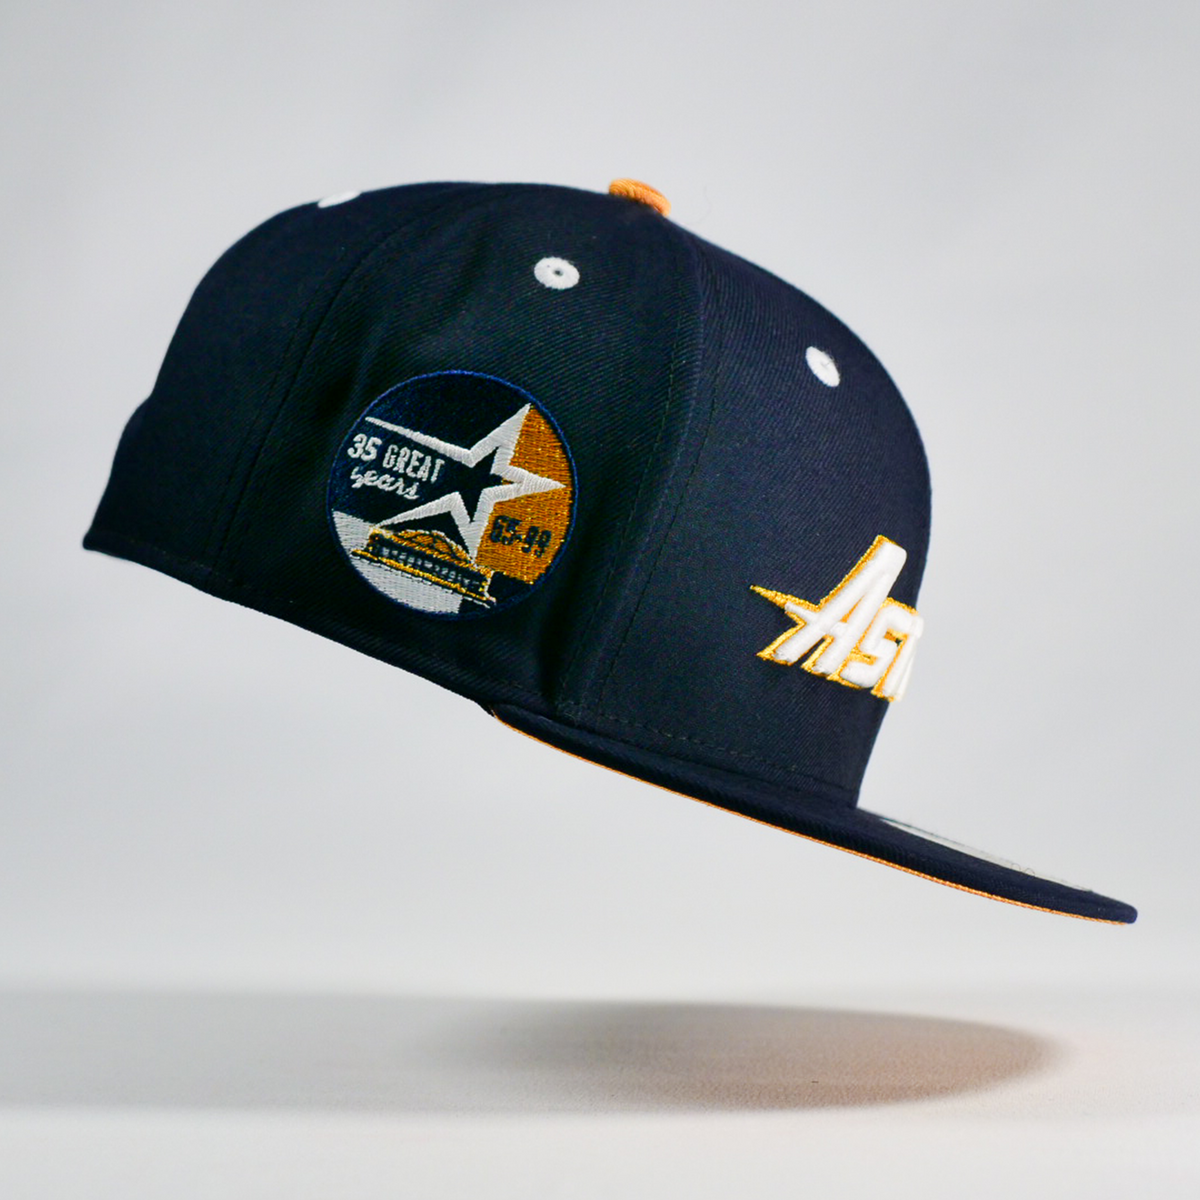 astros hat png